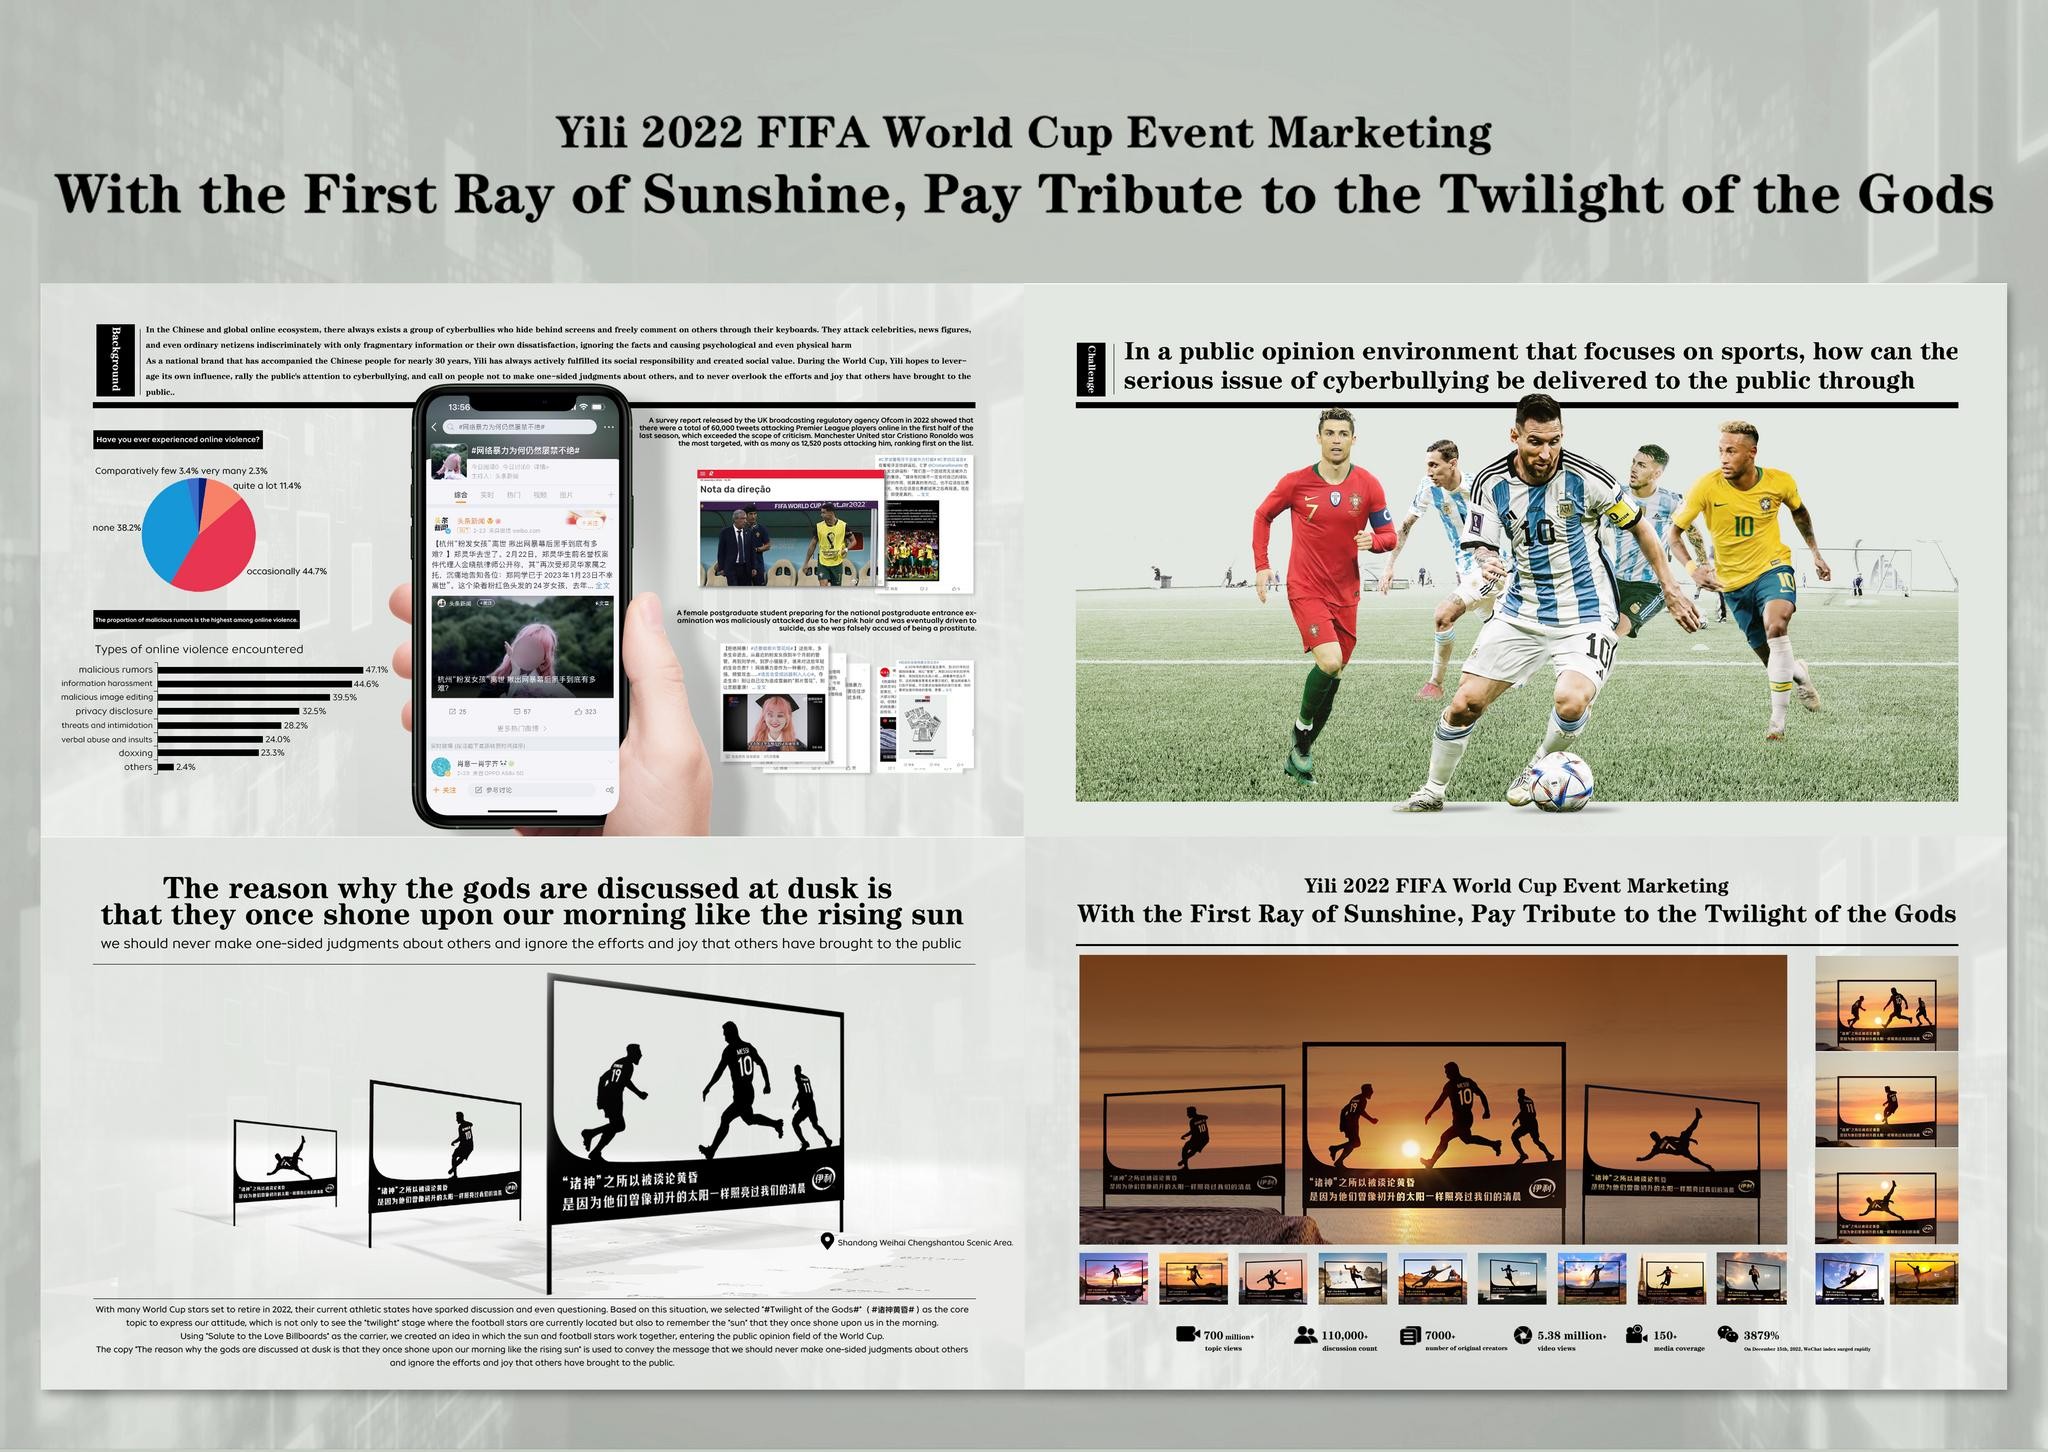 With the First Ray of Sunshine, Pay Tribute to the Twilight of the Gods - Yili 2022 FIFA World Cup Event Marketing